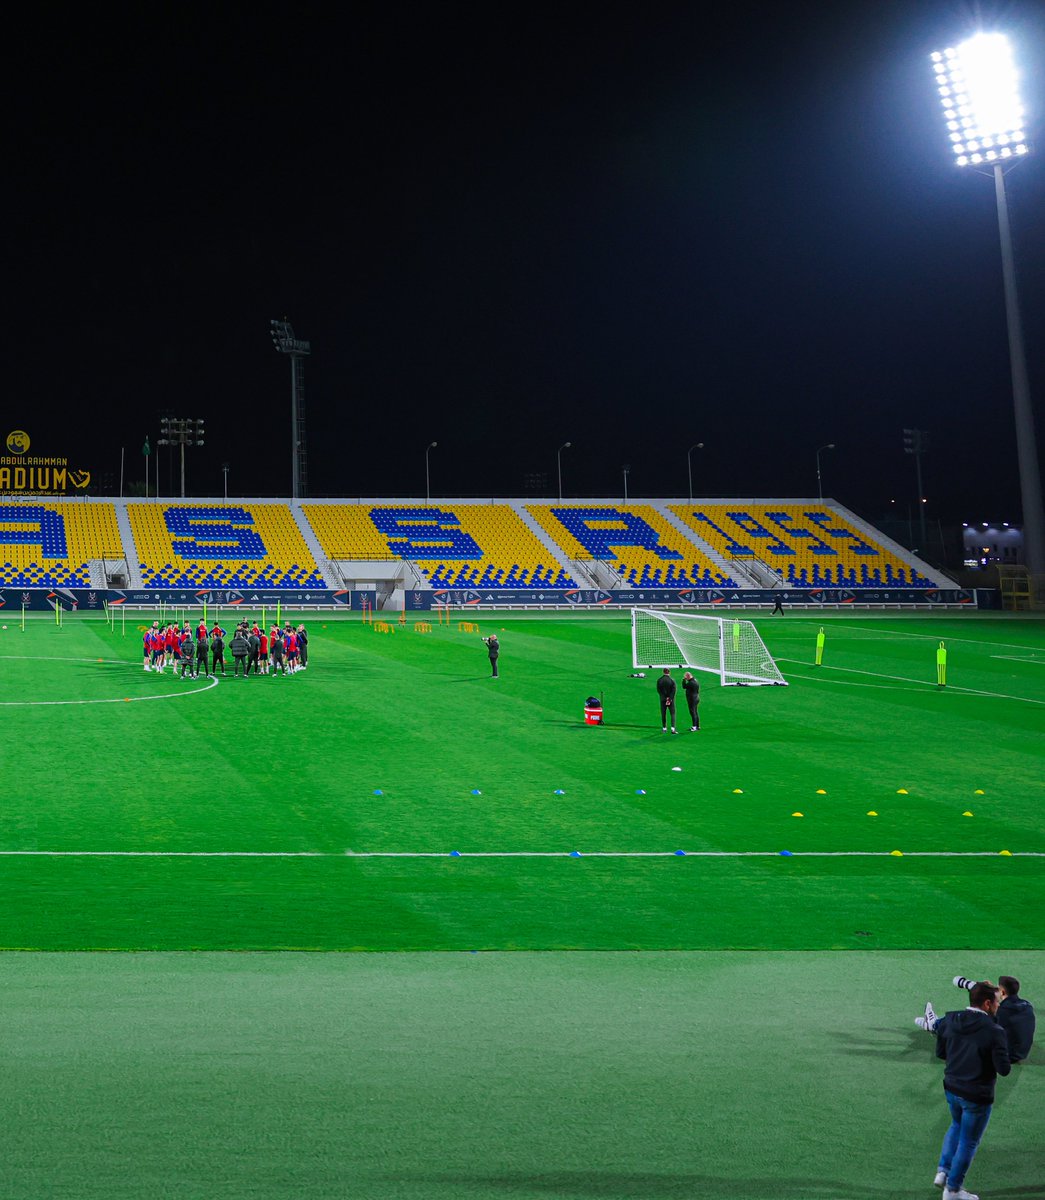 AlNassr means 'Victory' in Arabic 💛
Both Madrid and Barça held today a training session at AlNassr training headquarters seeking for the victory in tomorrow's match 🤩

In your opinion, who will win #SuperSupercopa  in #ElClásico ? 🔥